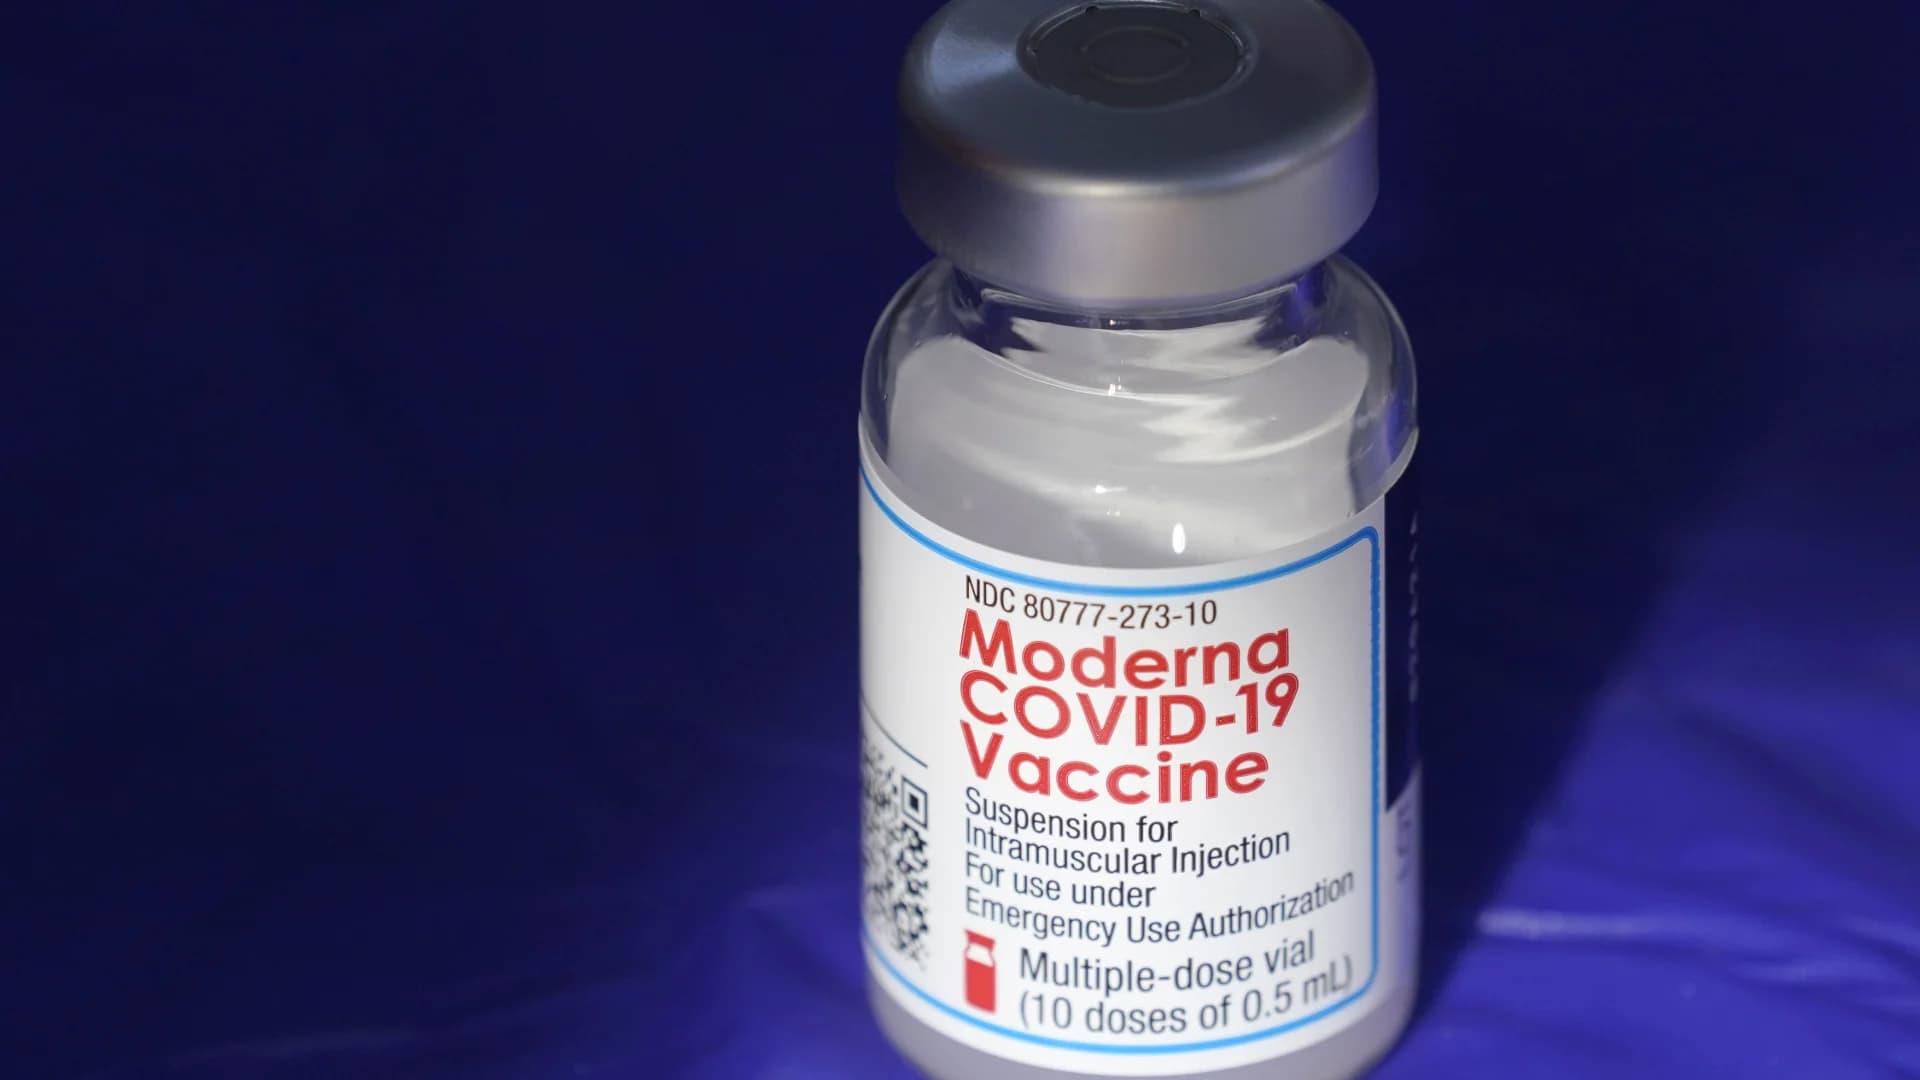 FDA approves extra COVID-19 vaccine for those with weak immune systems